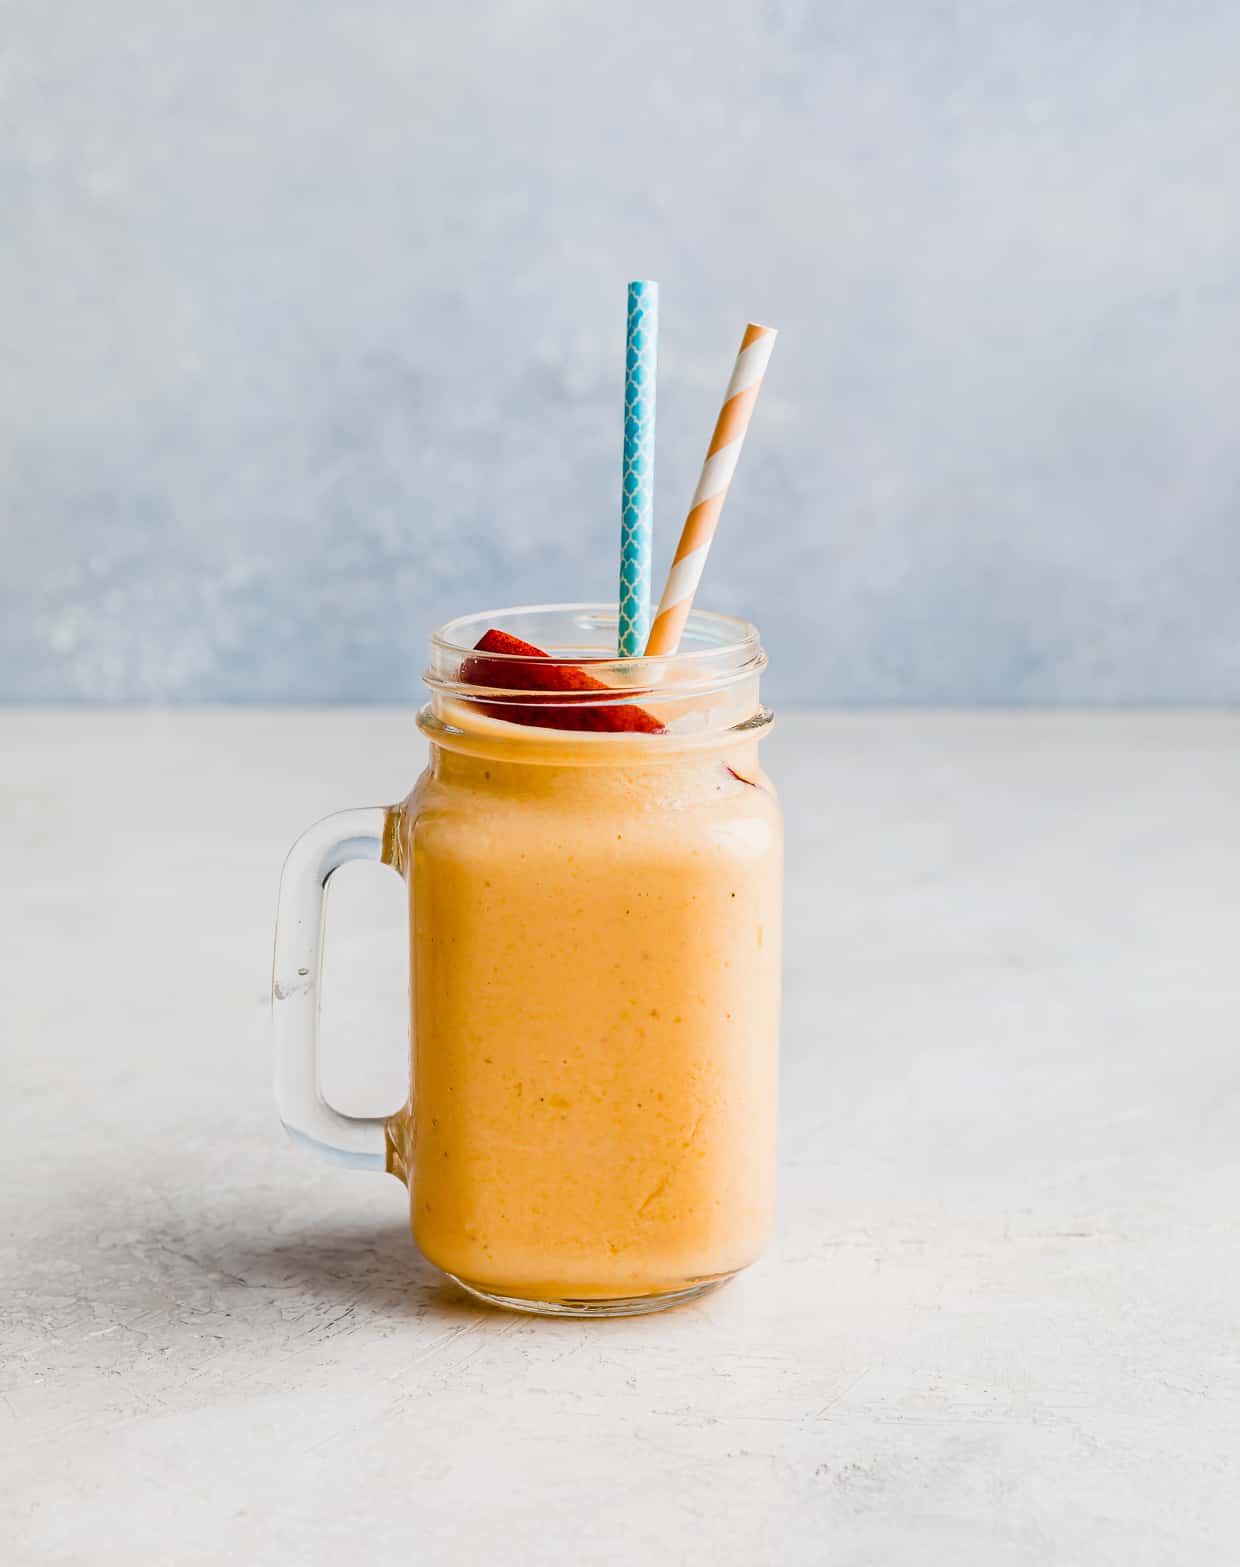 A glass cup filled with an orange colored peaches and banana smoothie against a light blue background.